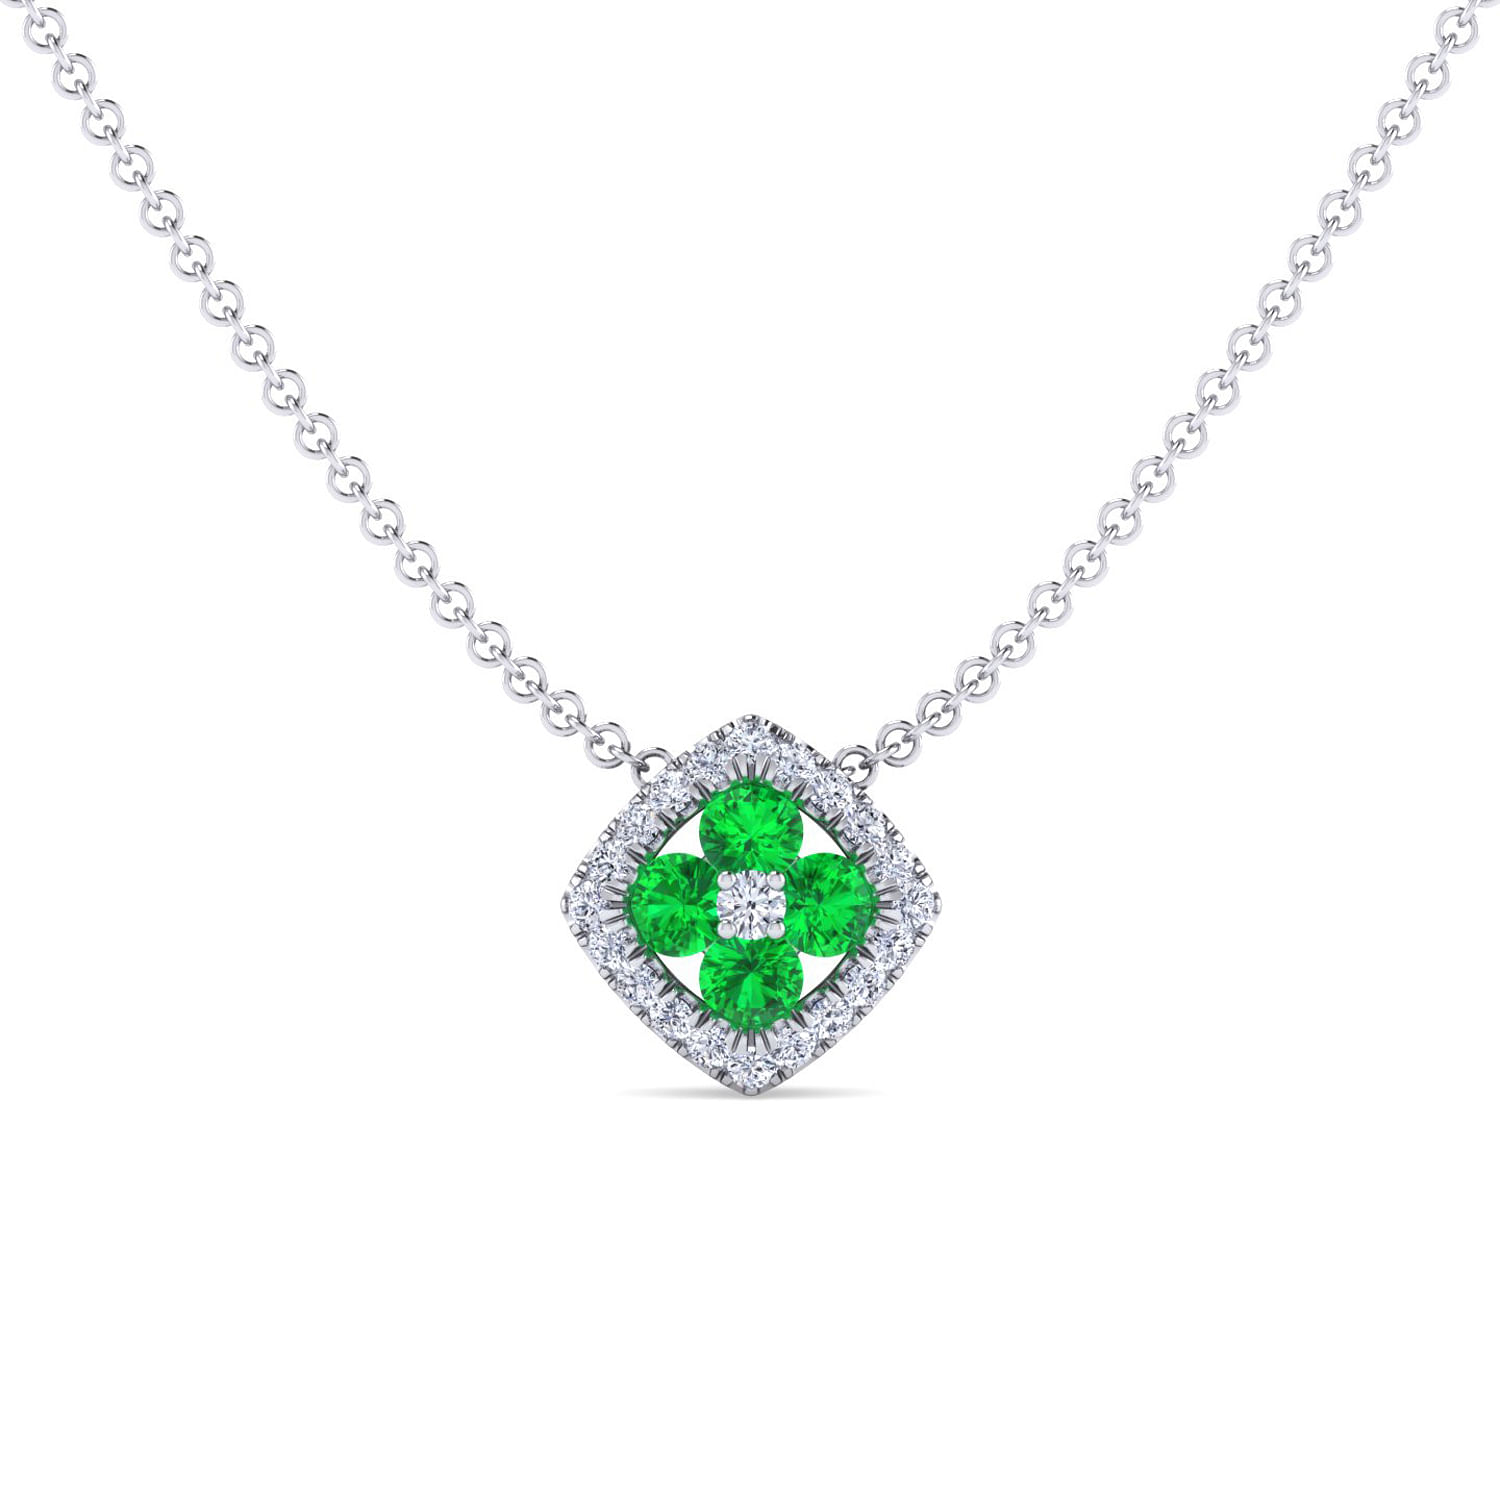 14K White Gold Emerald and Diamond Halo Floral Pendant Necklace